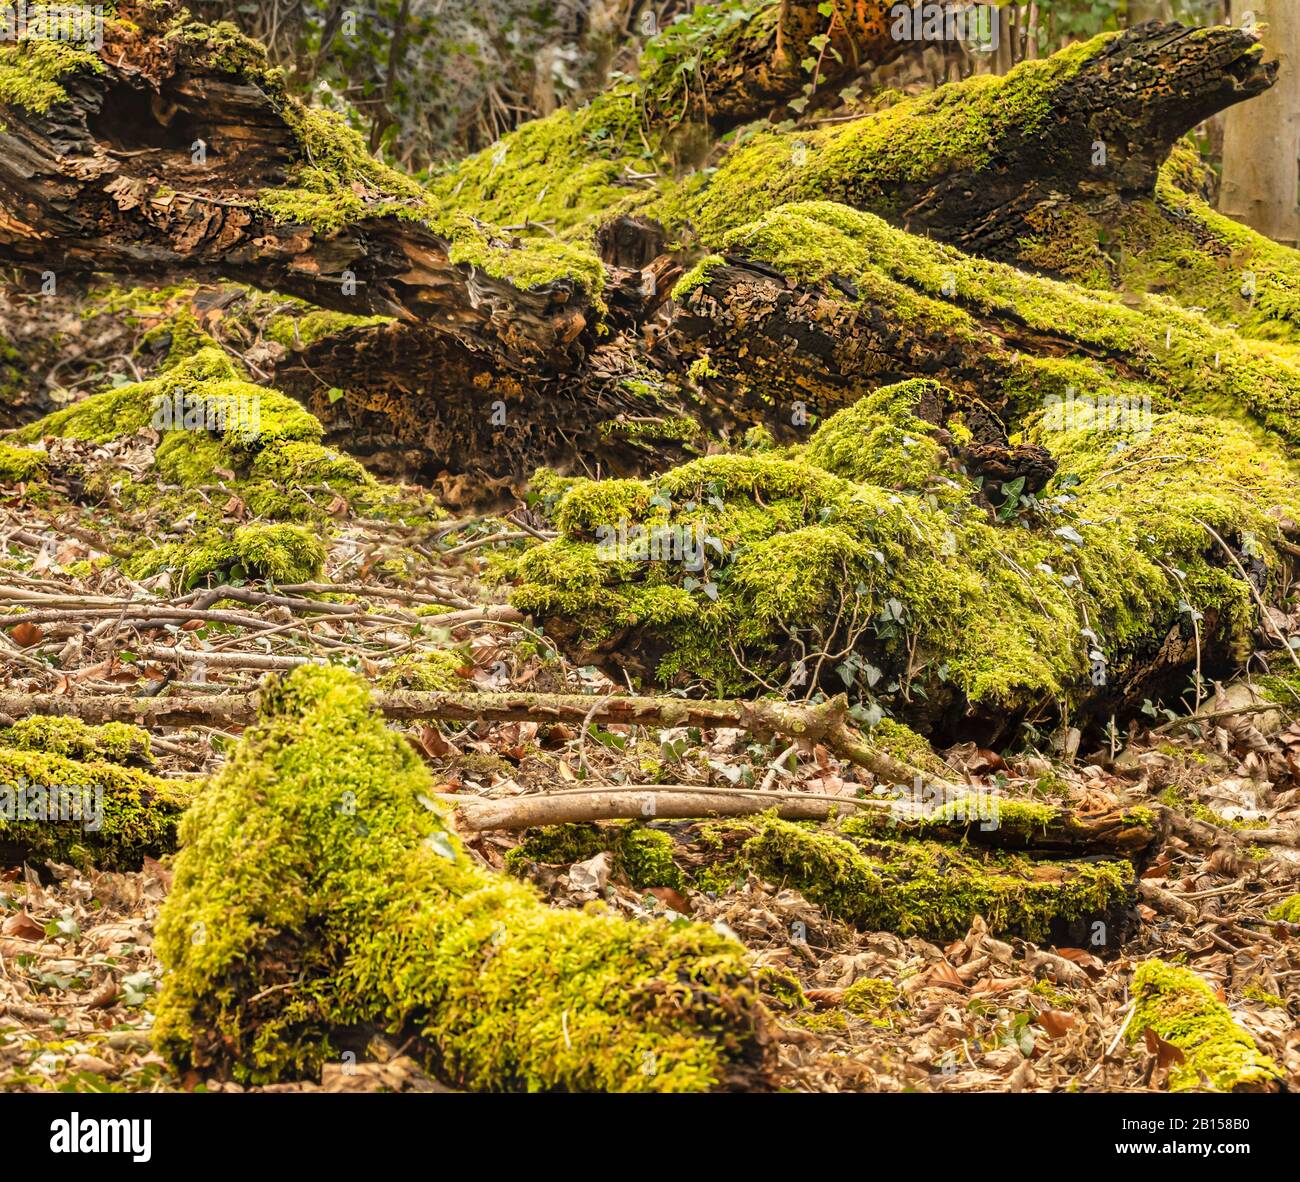 Woodland Moss, Moss, Green Moss growing on fallen trees in the woods in Bedfordshire, United Kingdom Stock Photo